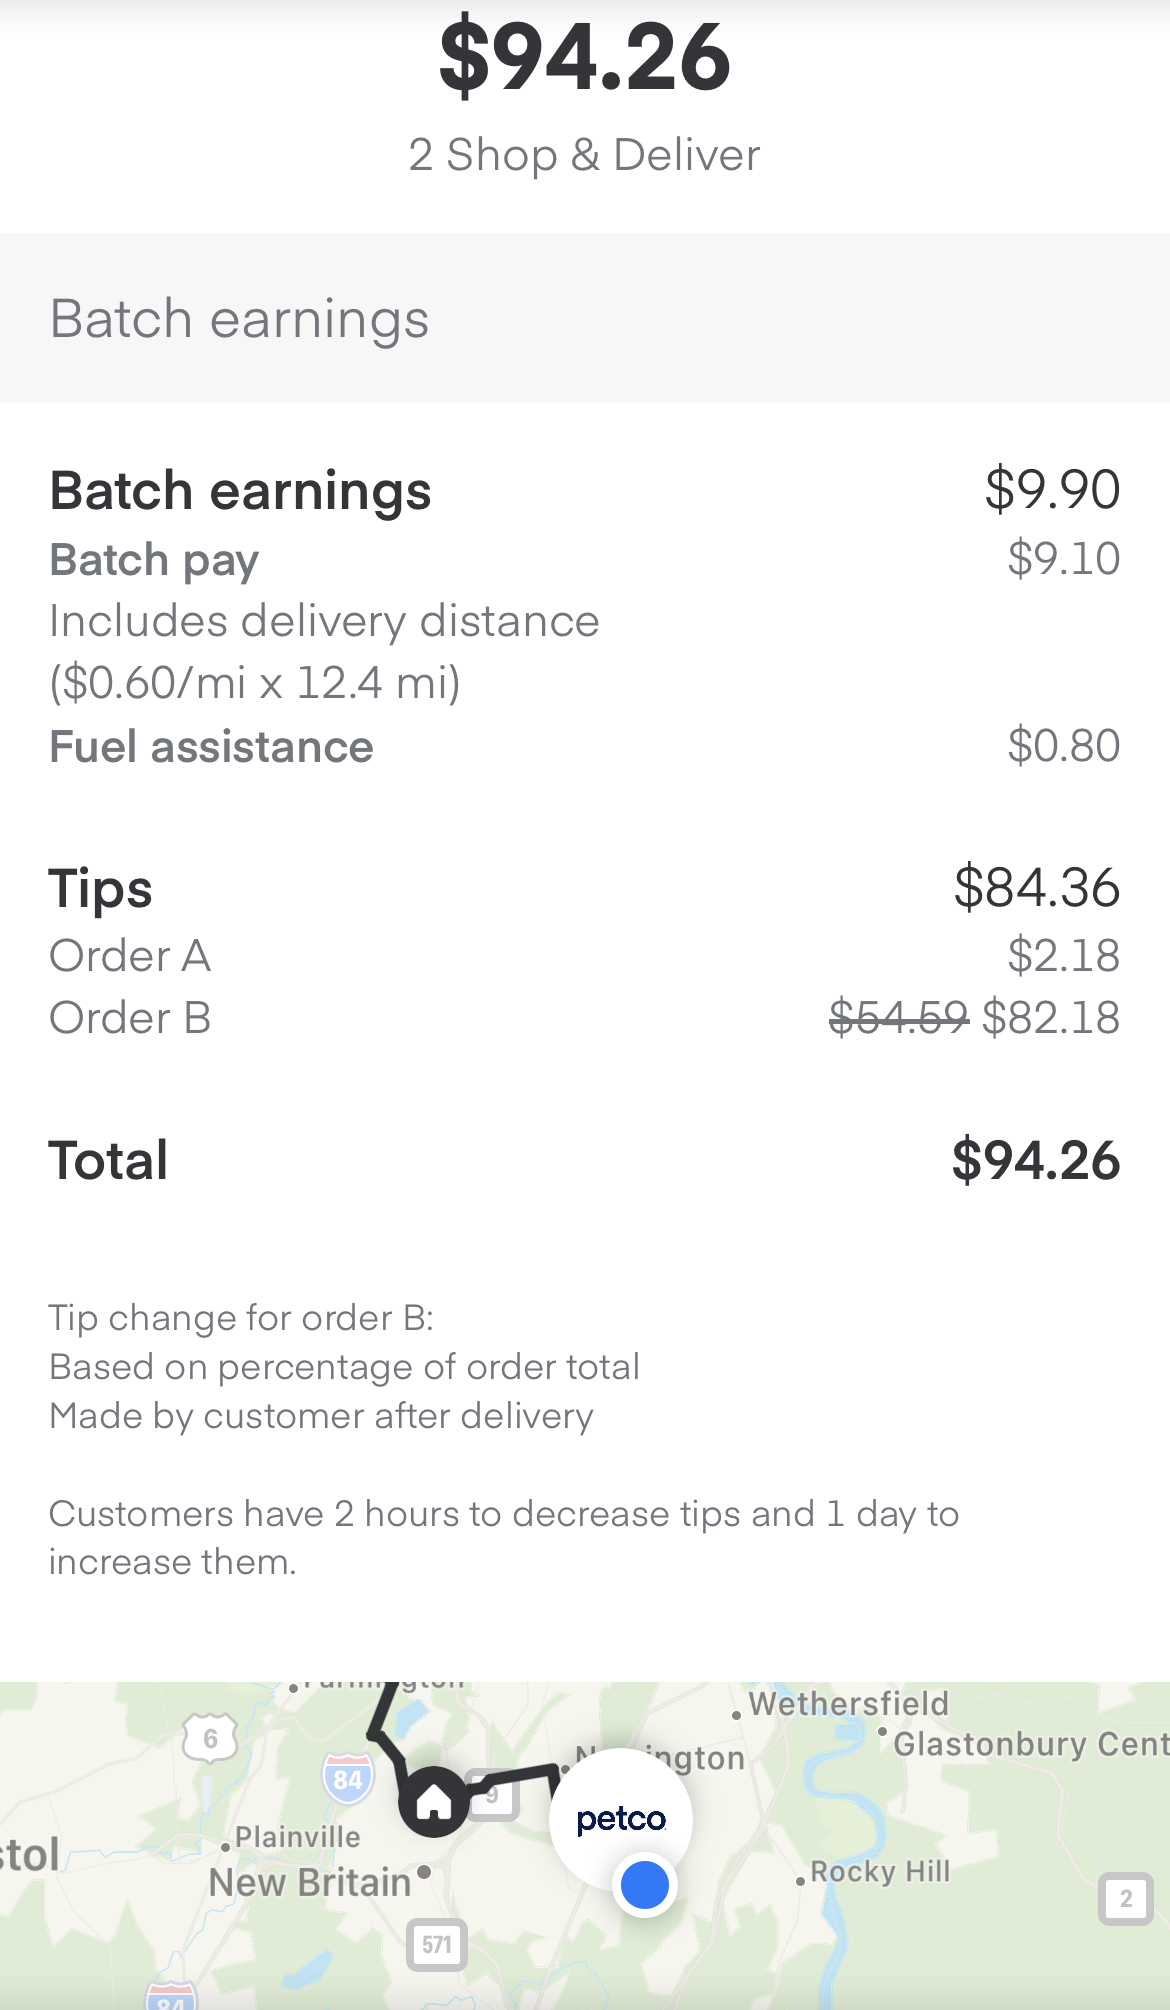 7 Instacart Tips from a Shopper Earning $3,000 per Month